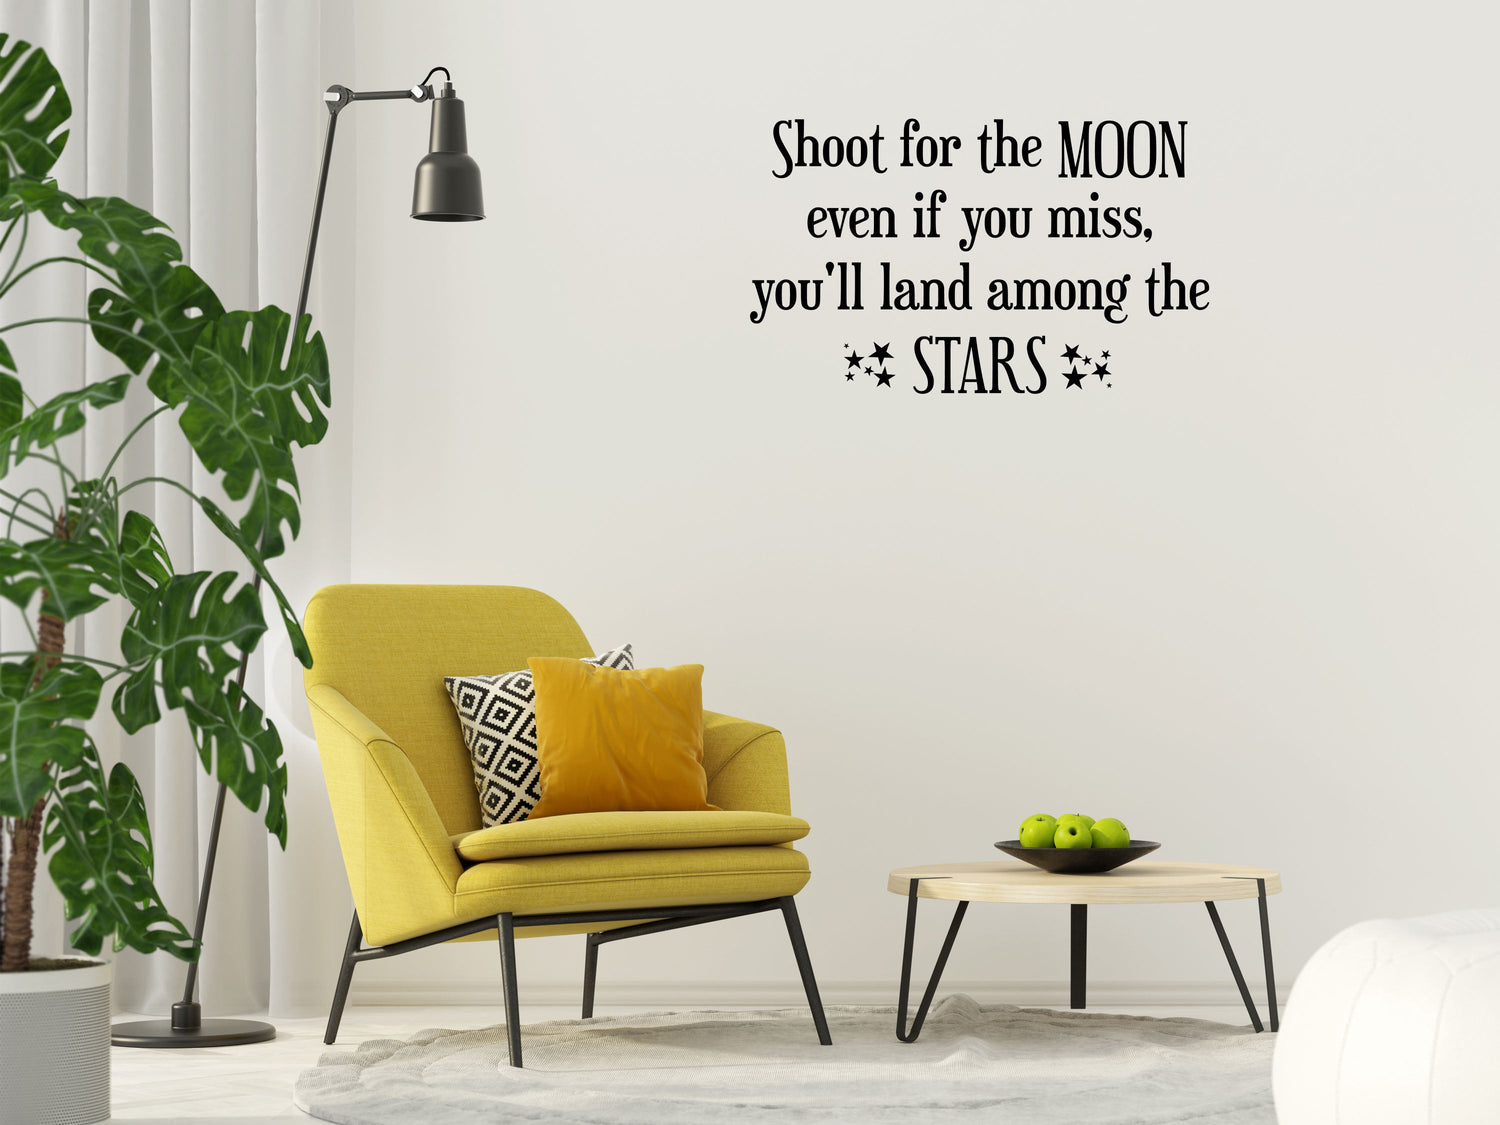 Shoot For The Moon and Stars - Inspirational Wall Decals Vinyl Wall Decal Inspirational Wall Signs 